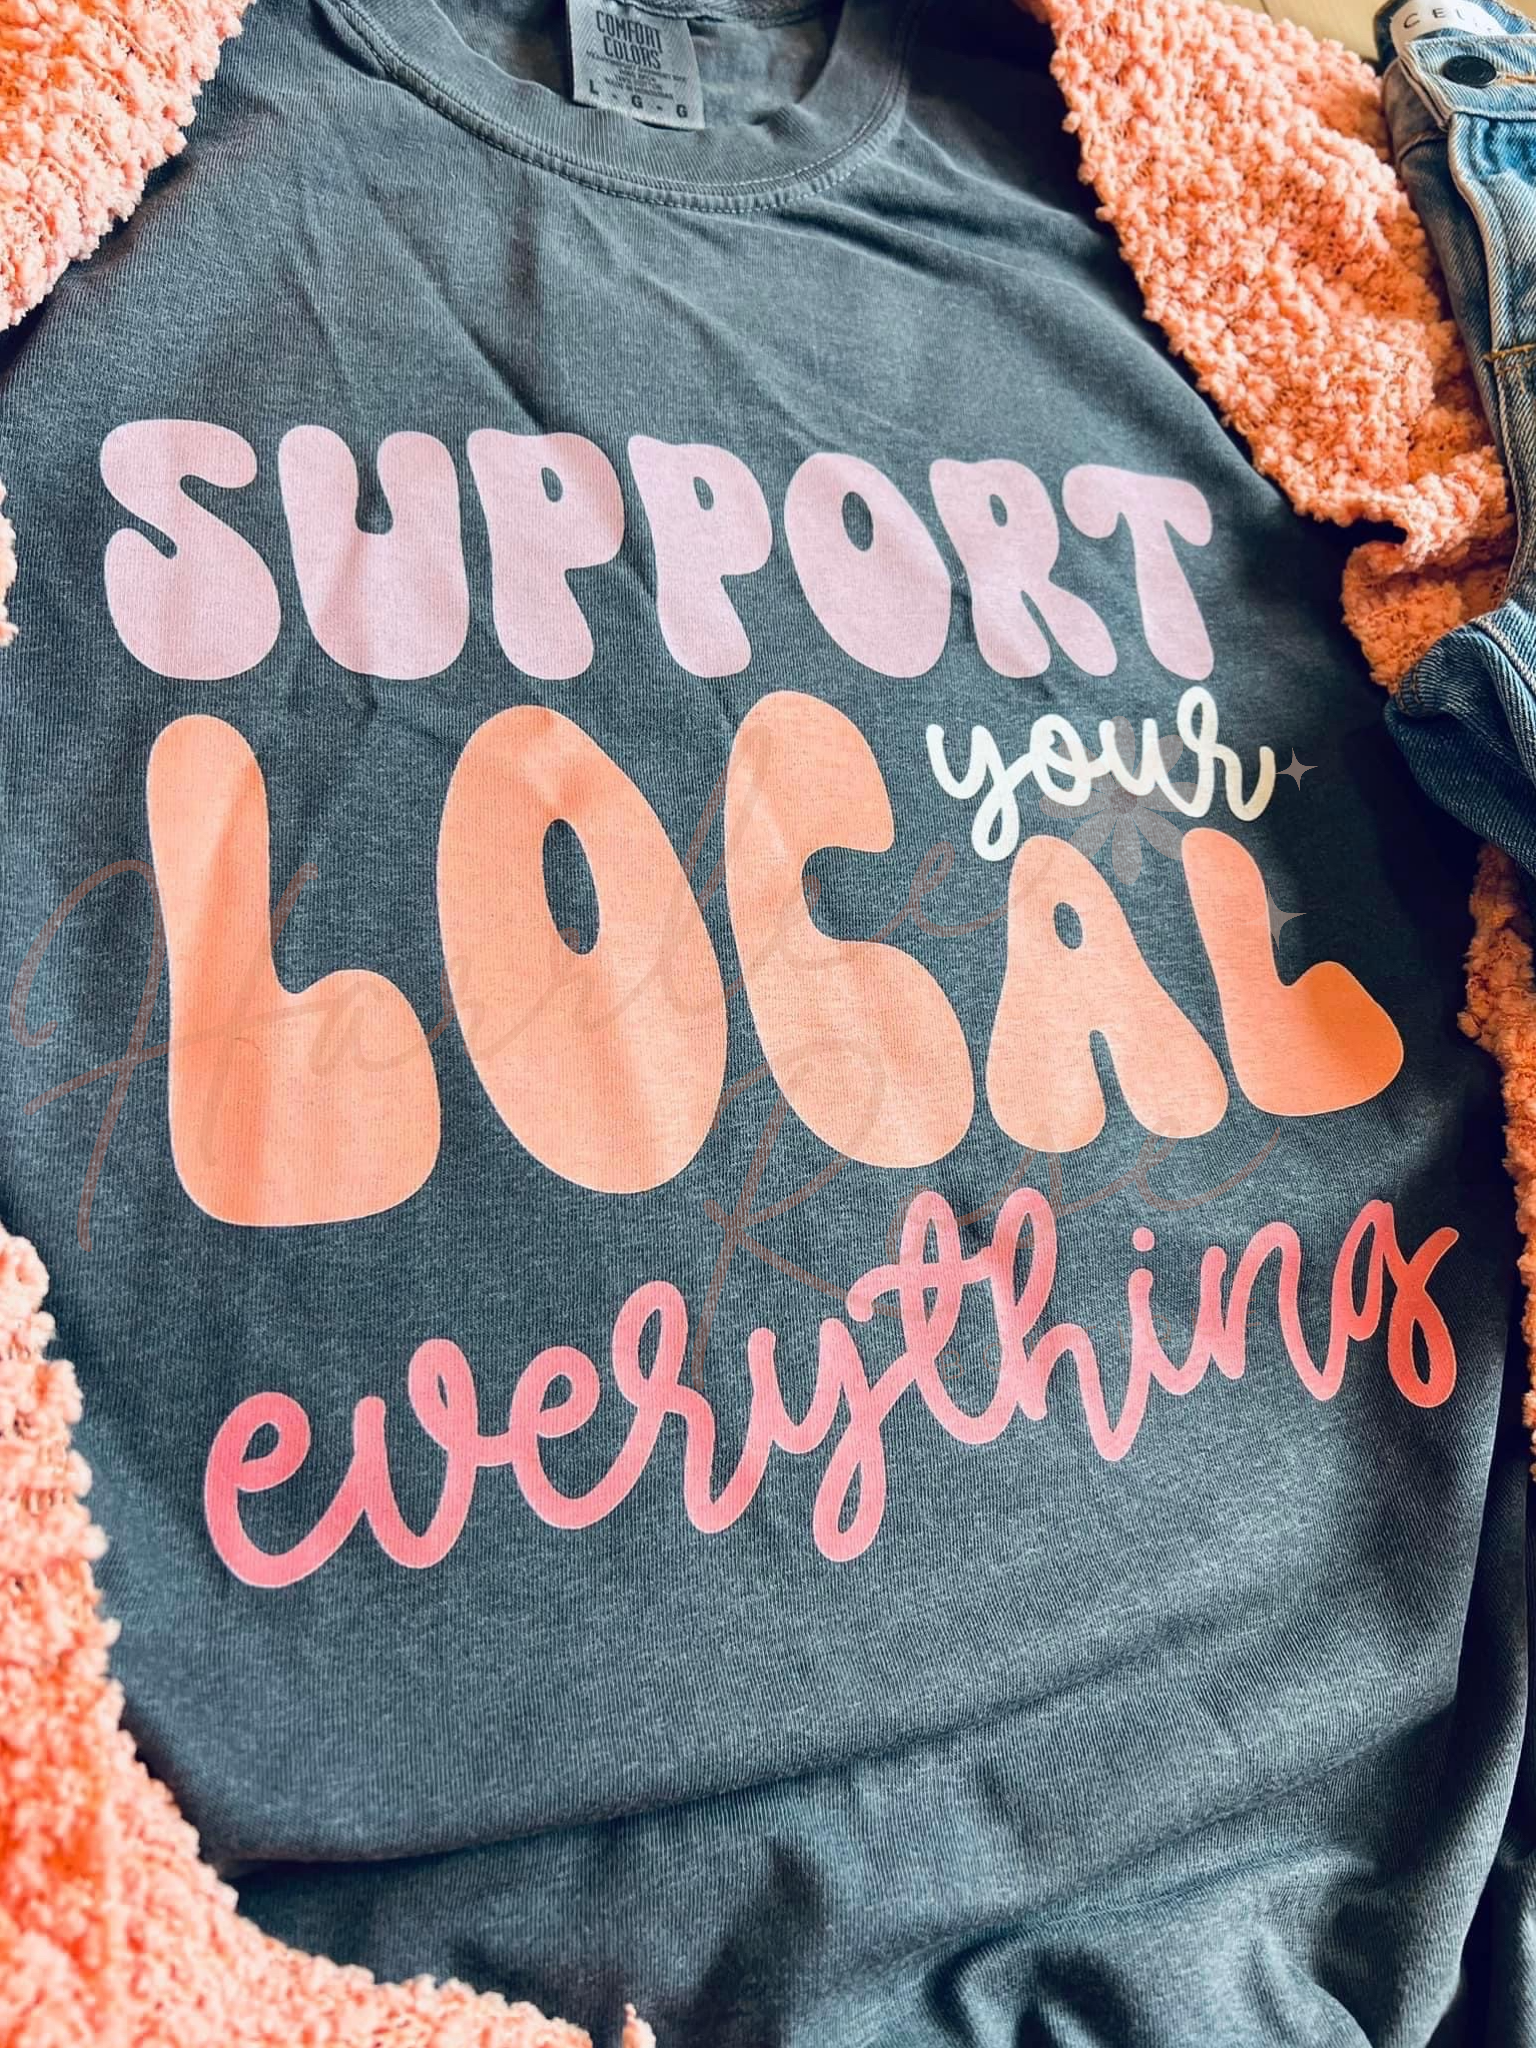 Support Your Local Everything